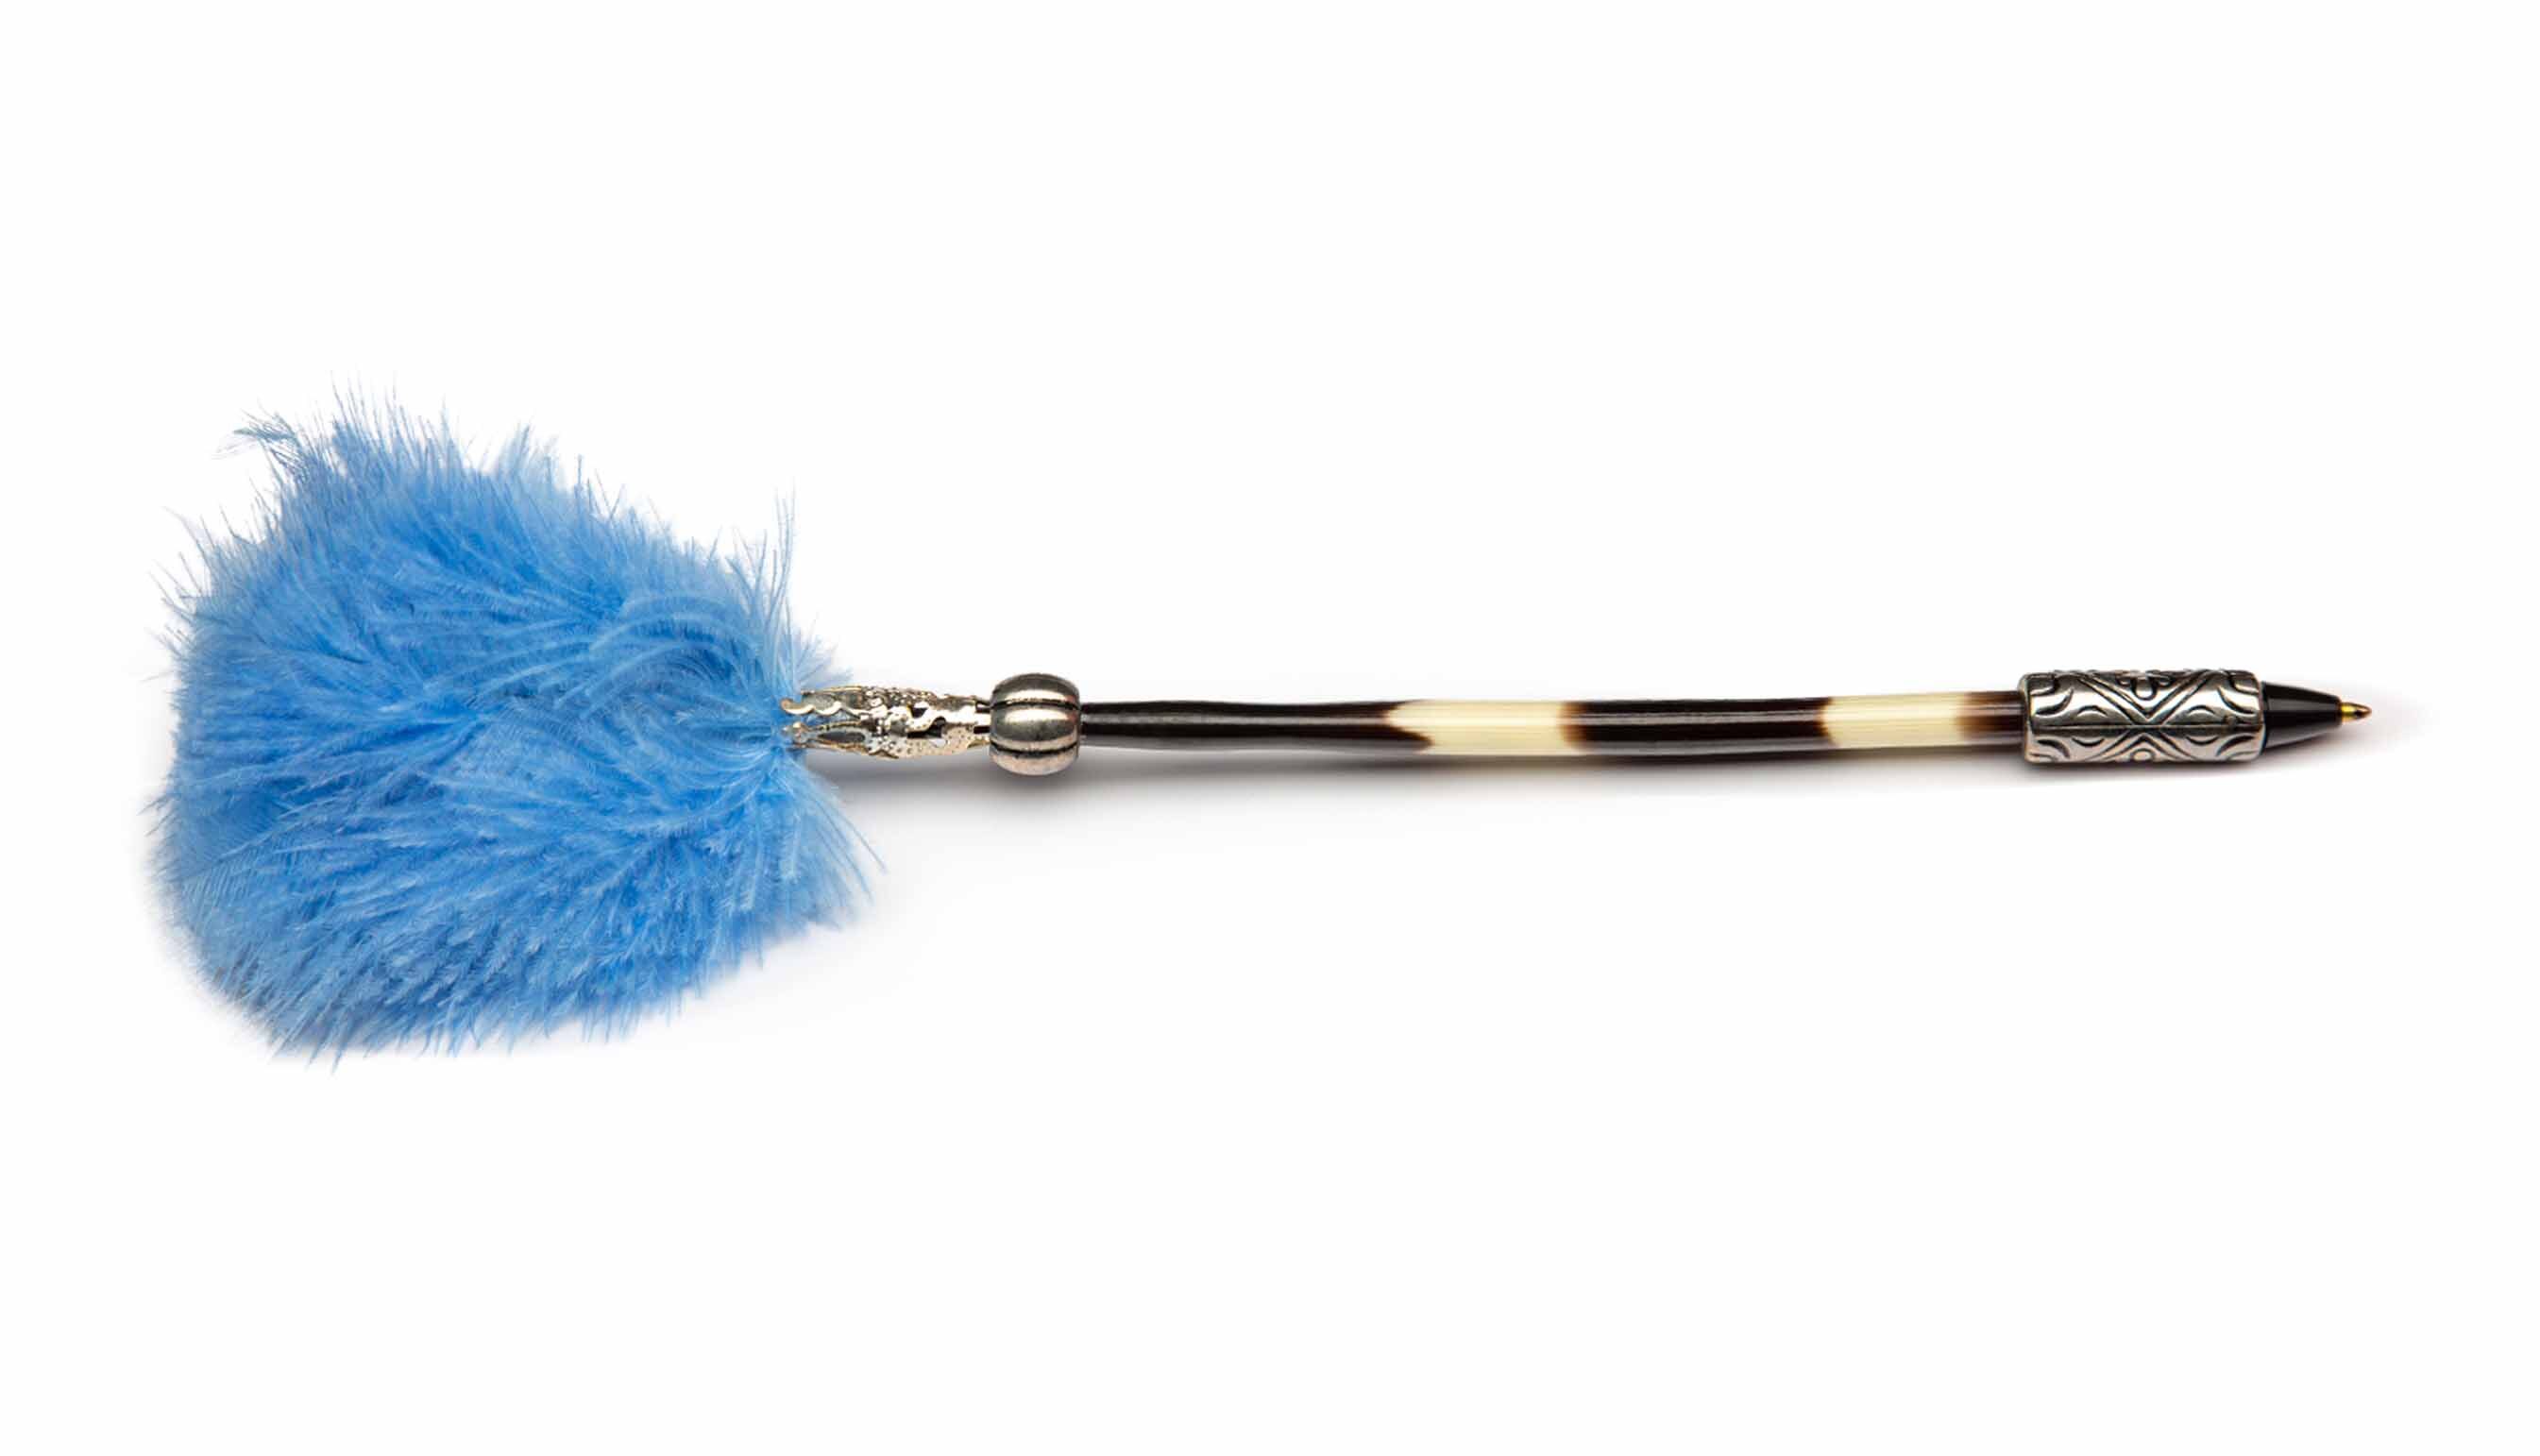 Porcupine Quill Pen W/ Light Blue Feathers